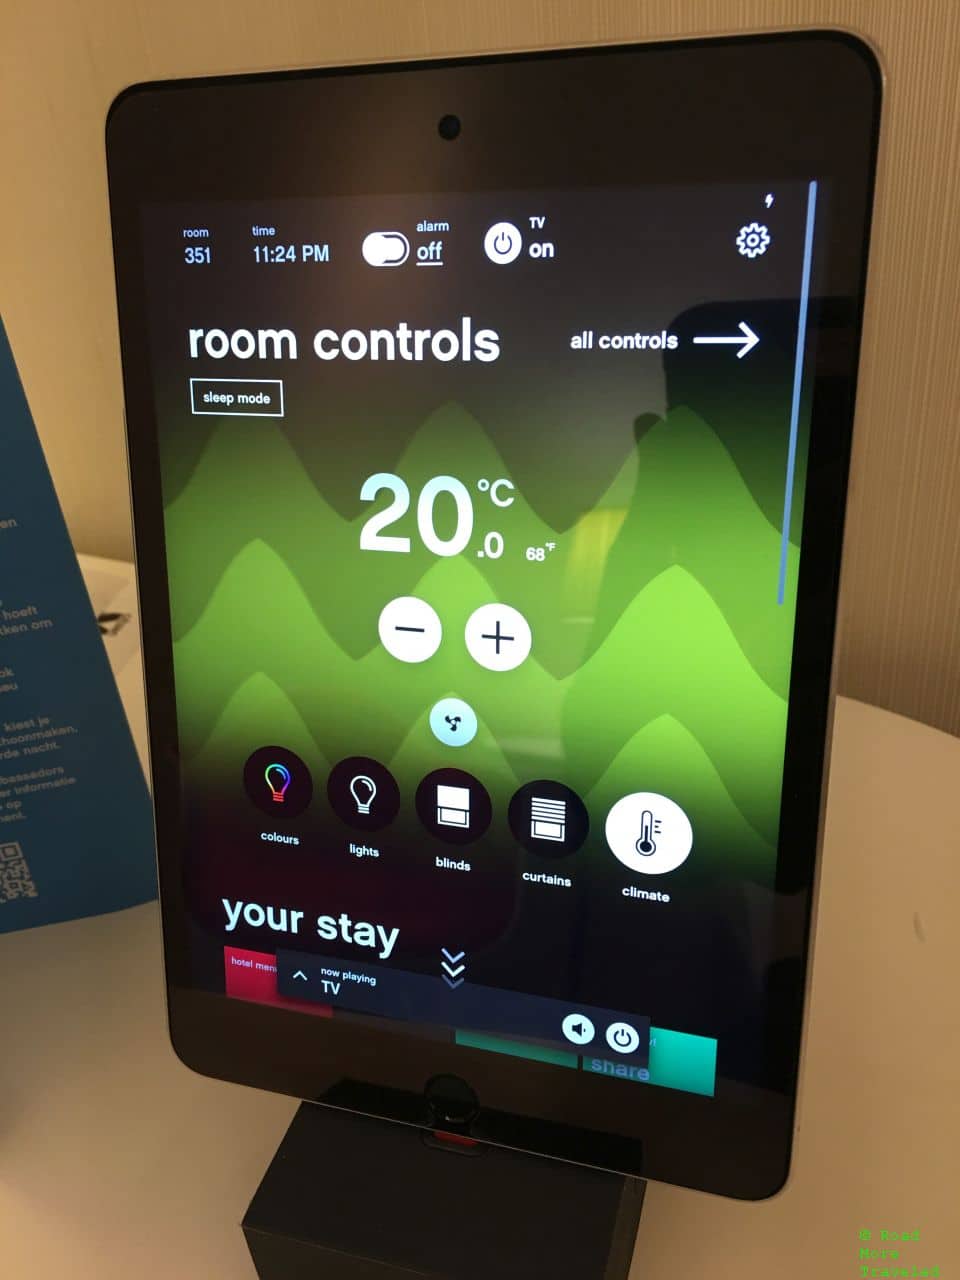 citizenM CDG climate control on tablet